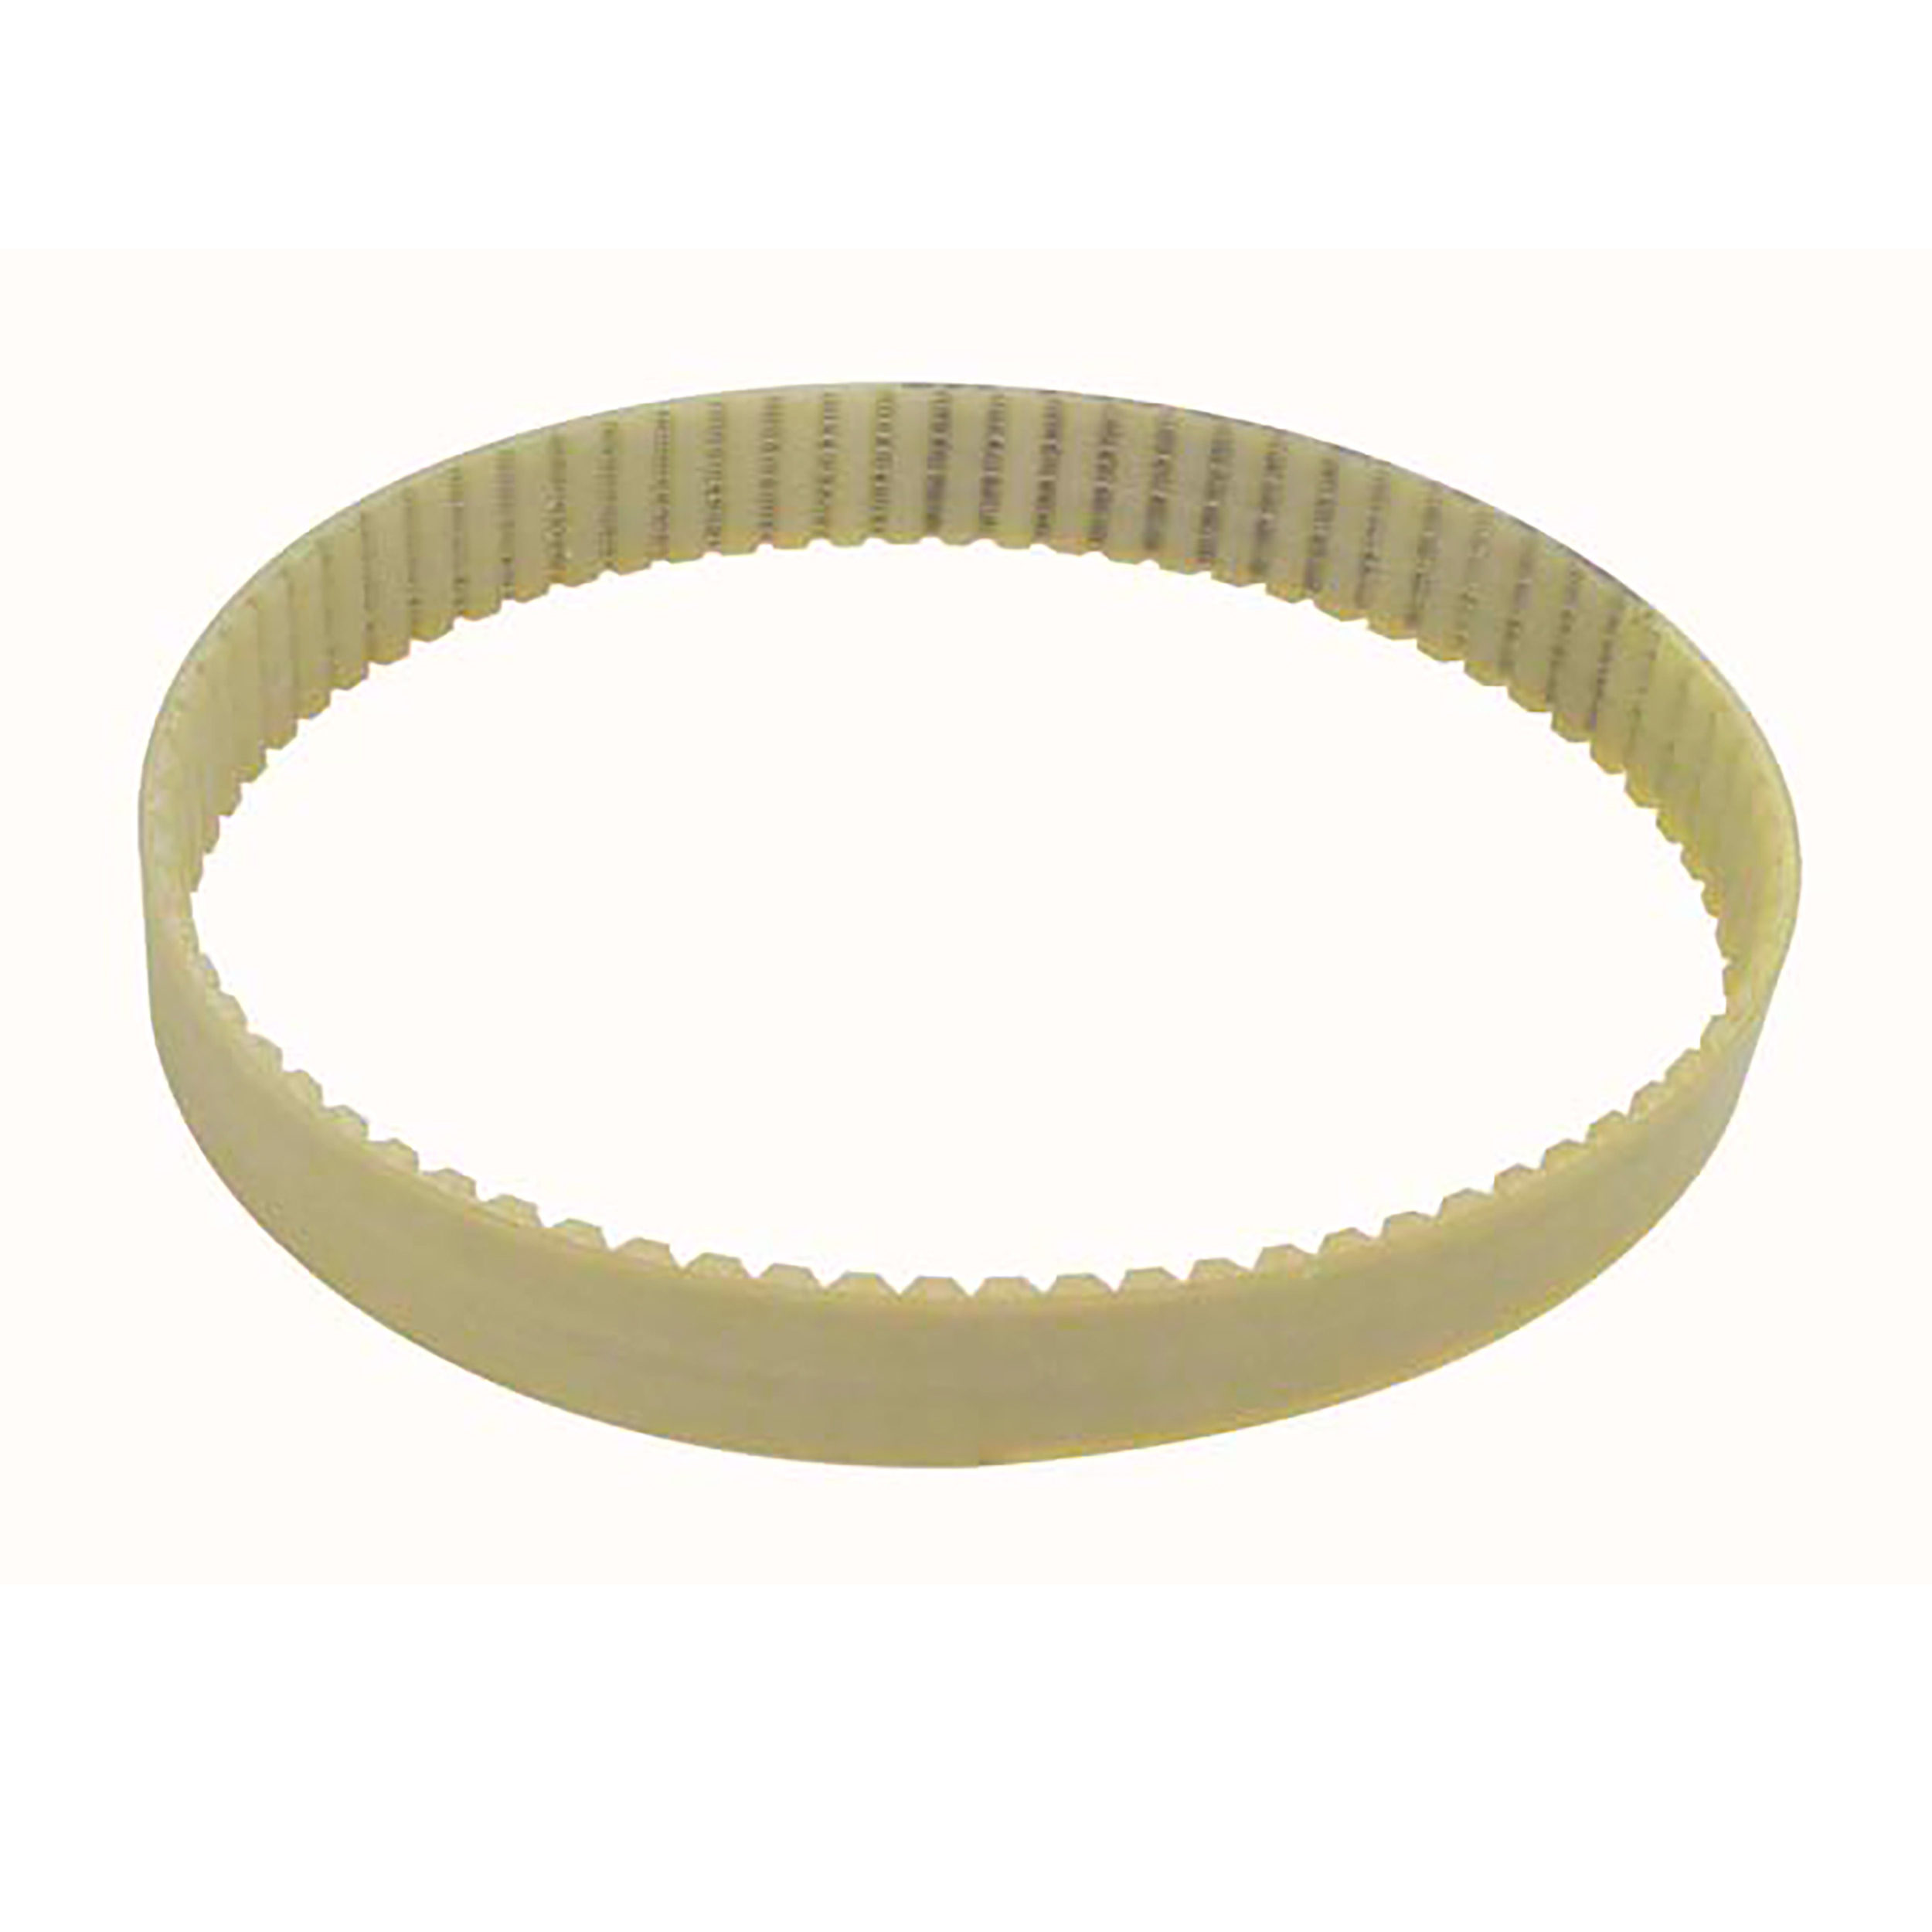 AT type timing belt - AT5 Steel cored polyurethane - 16mm - AT